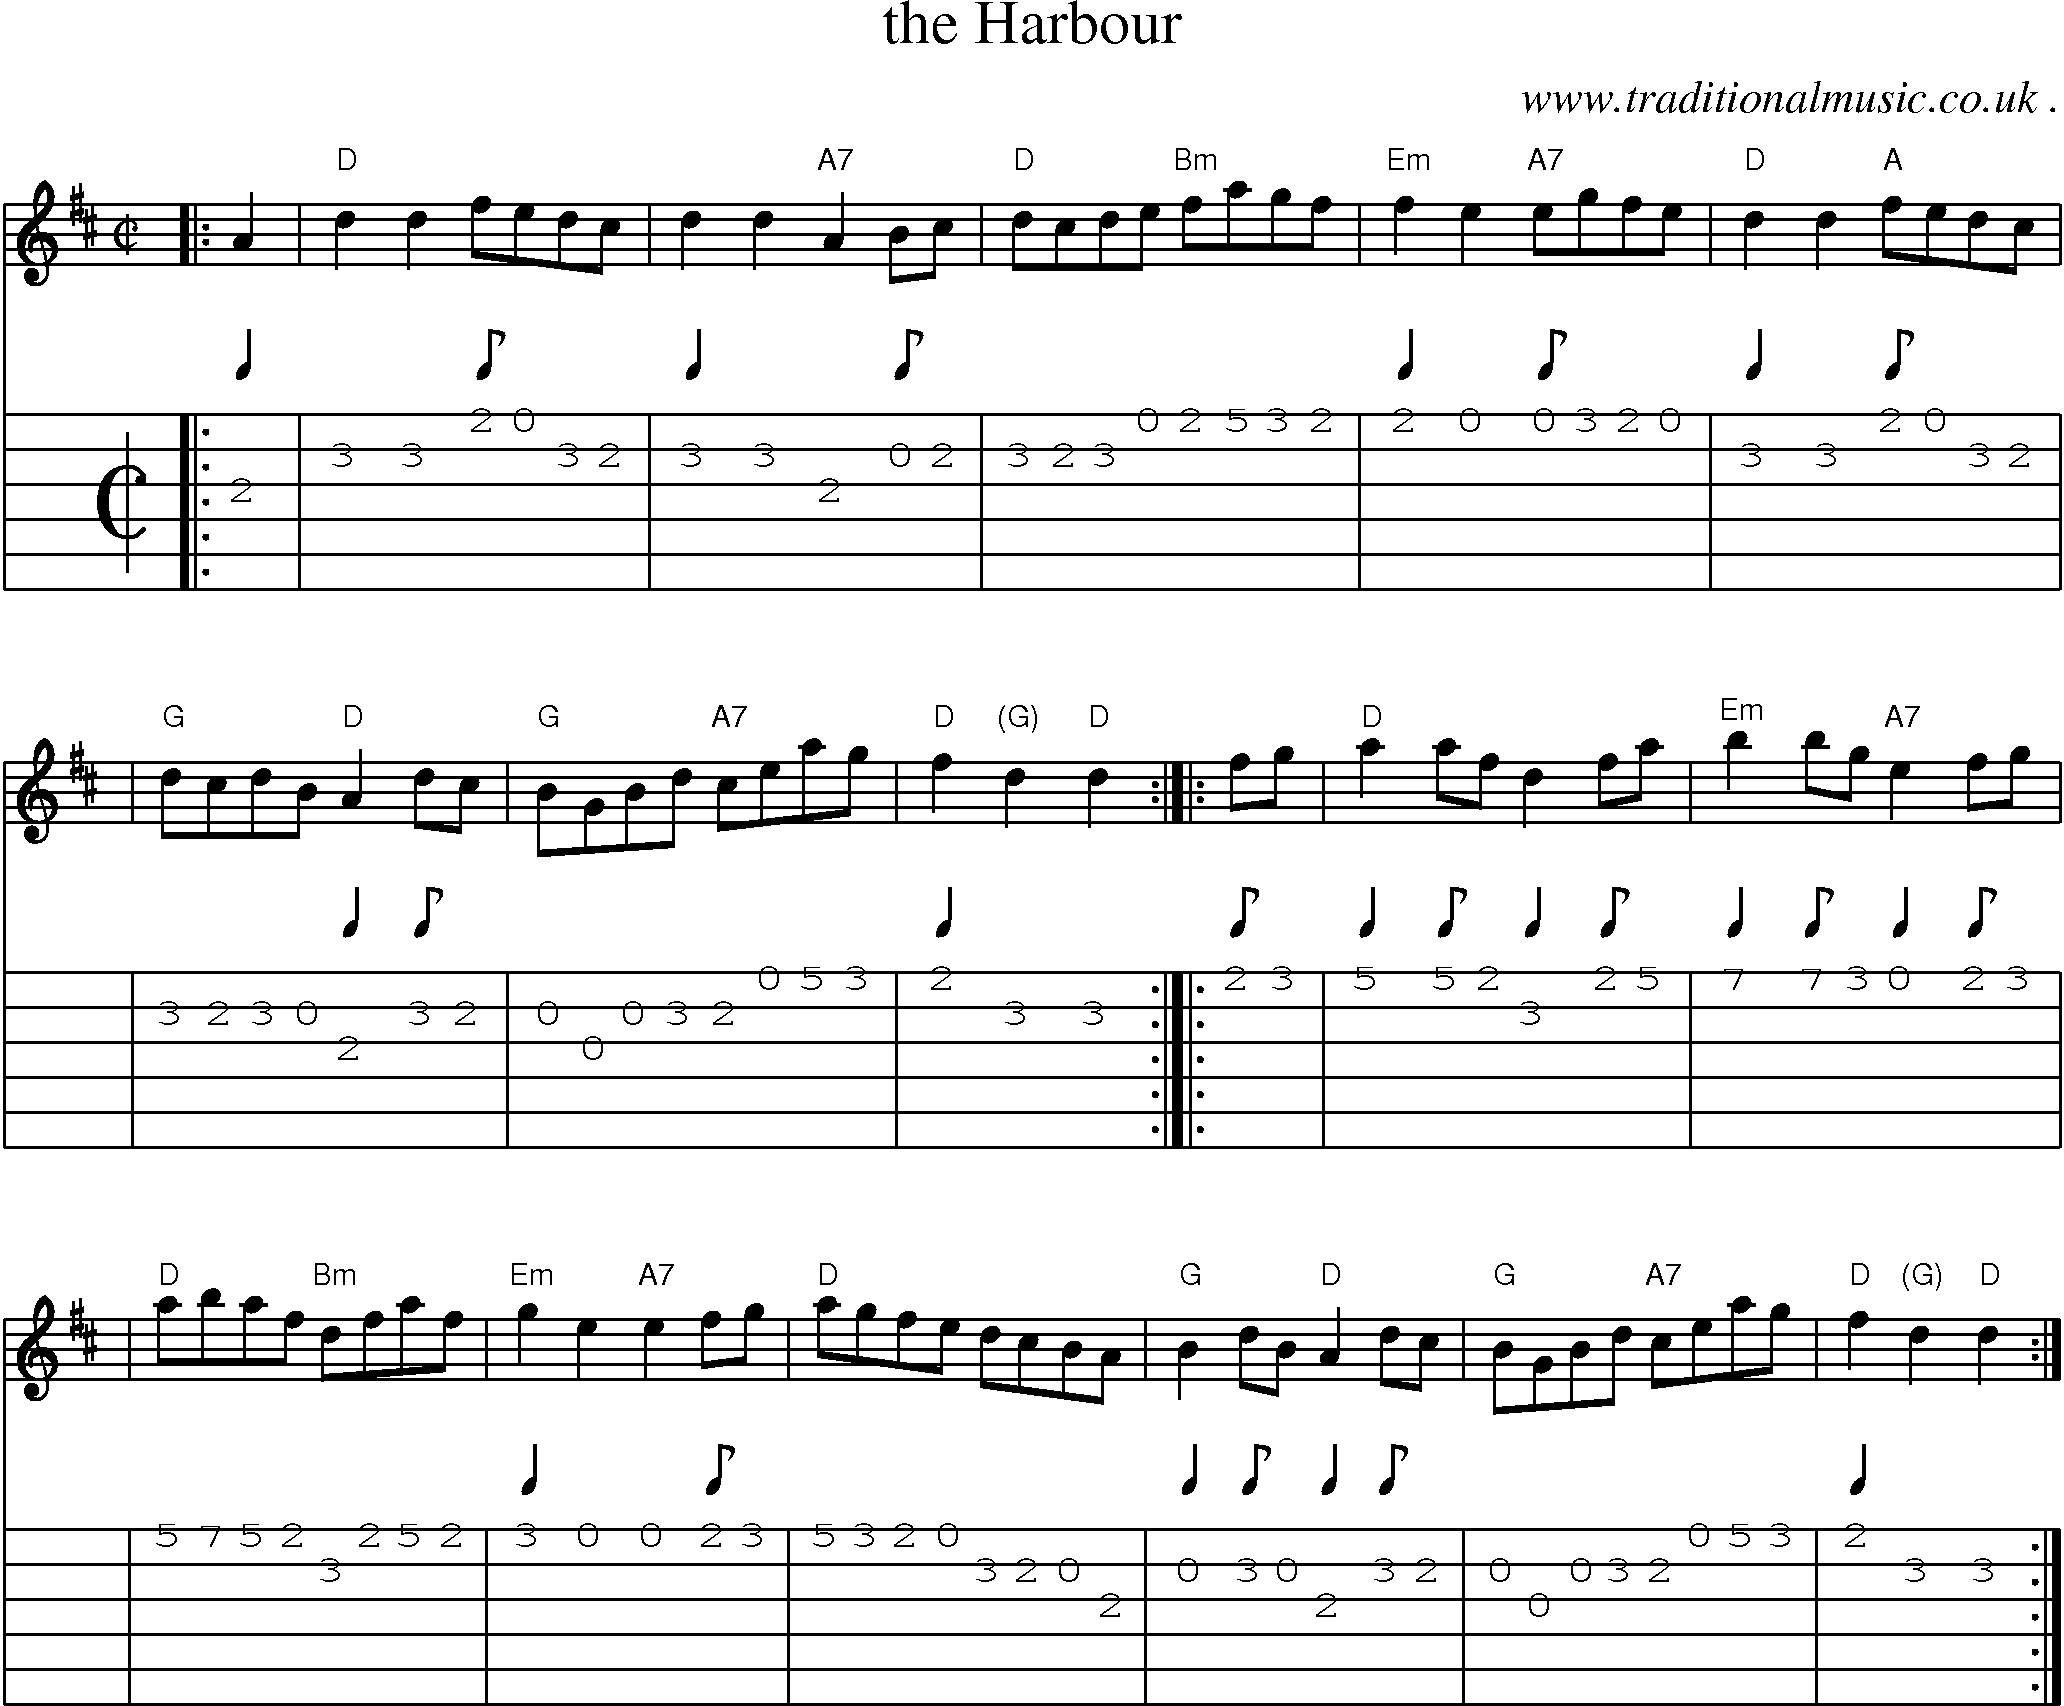 Sheet-music  score, Chords and Guitar Tabs for The Harbour